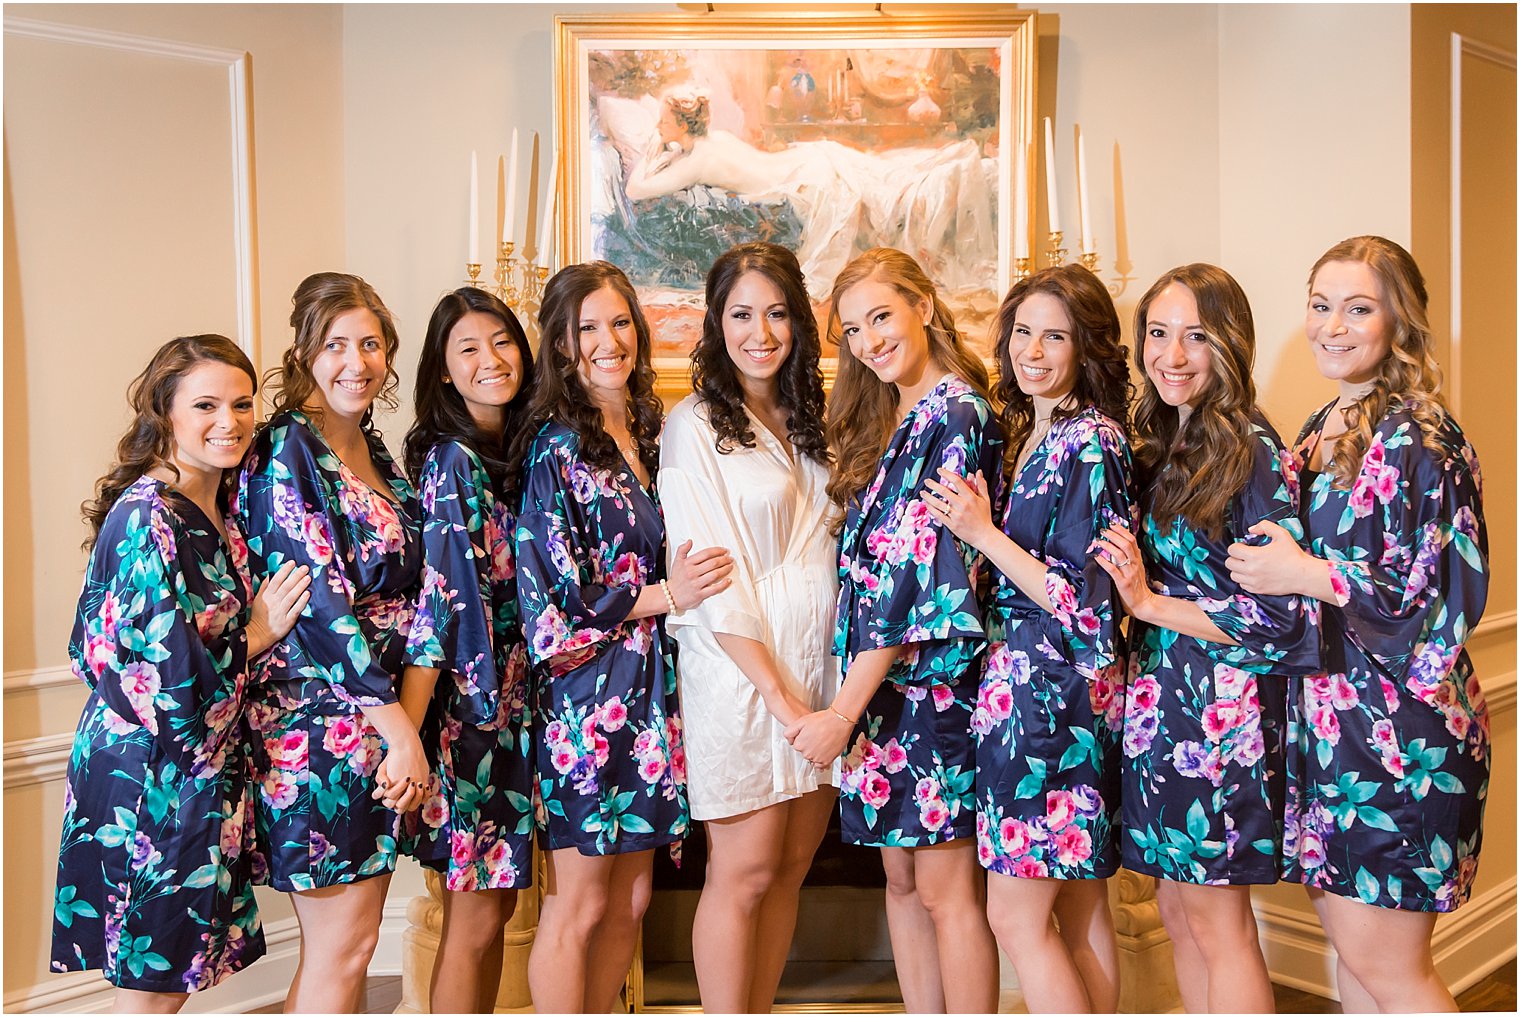 Bridesmaids in matching robes | Photo by Idalia Photography